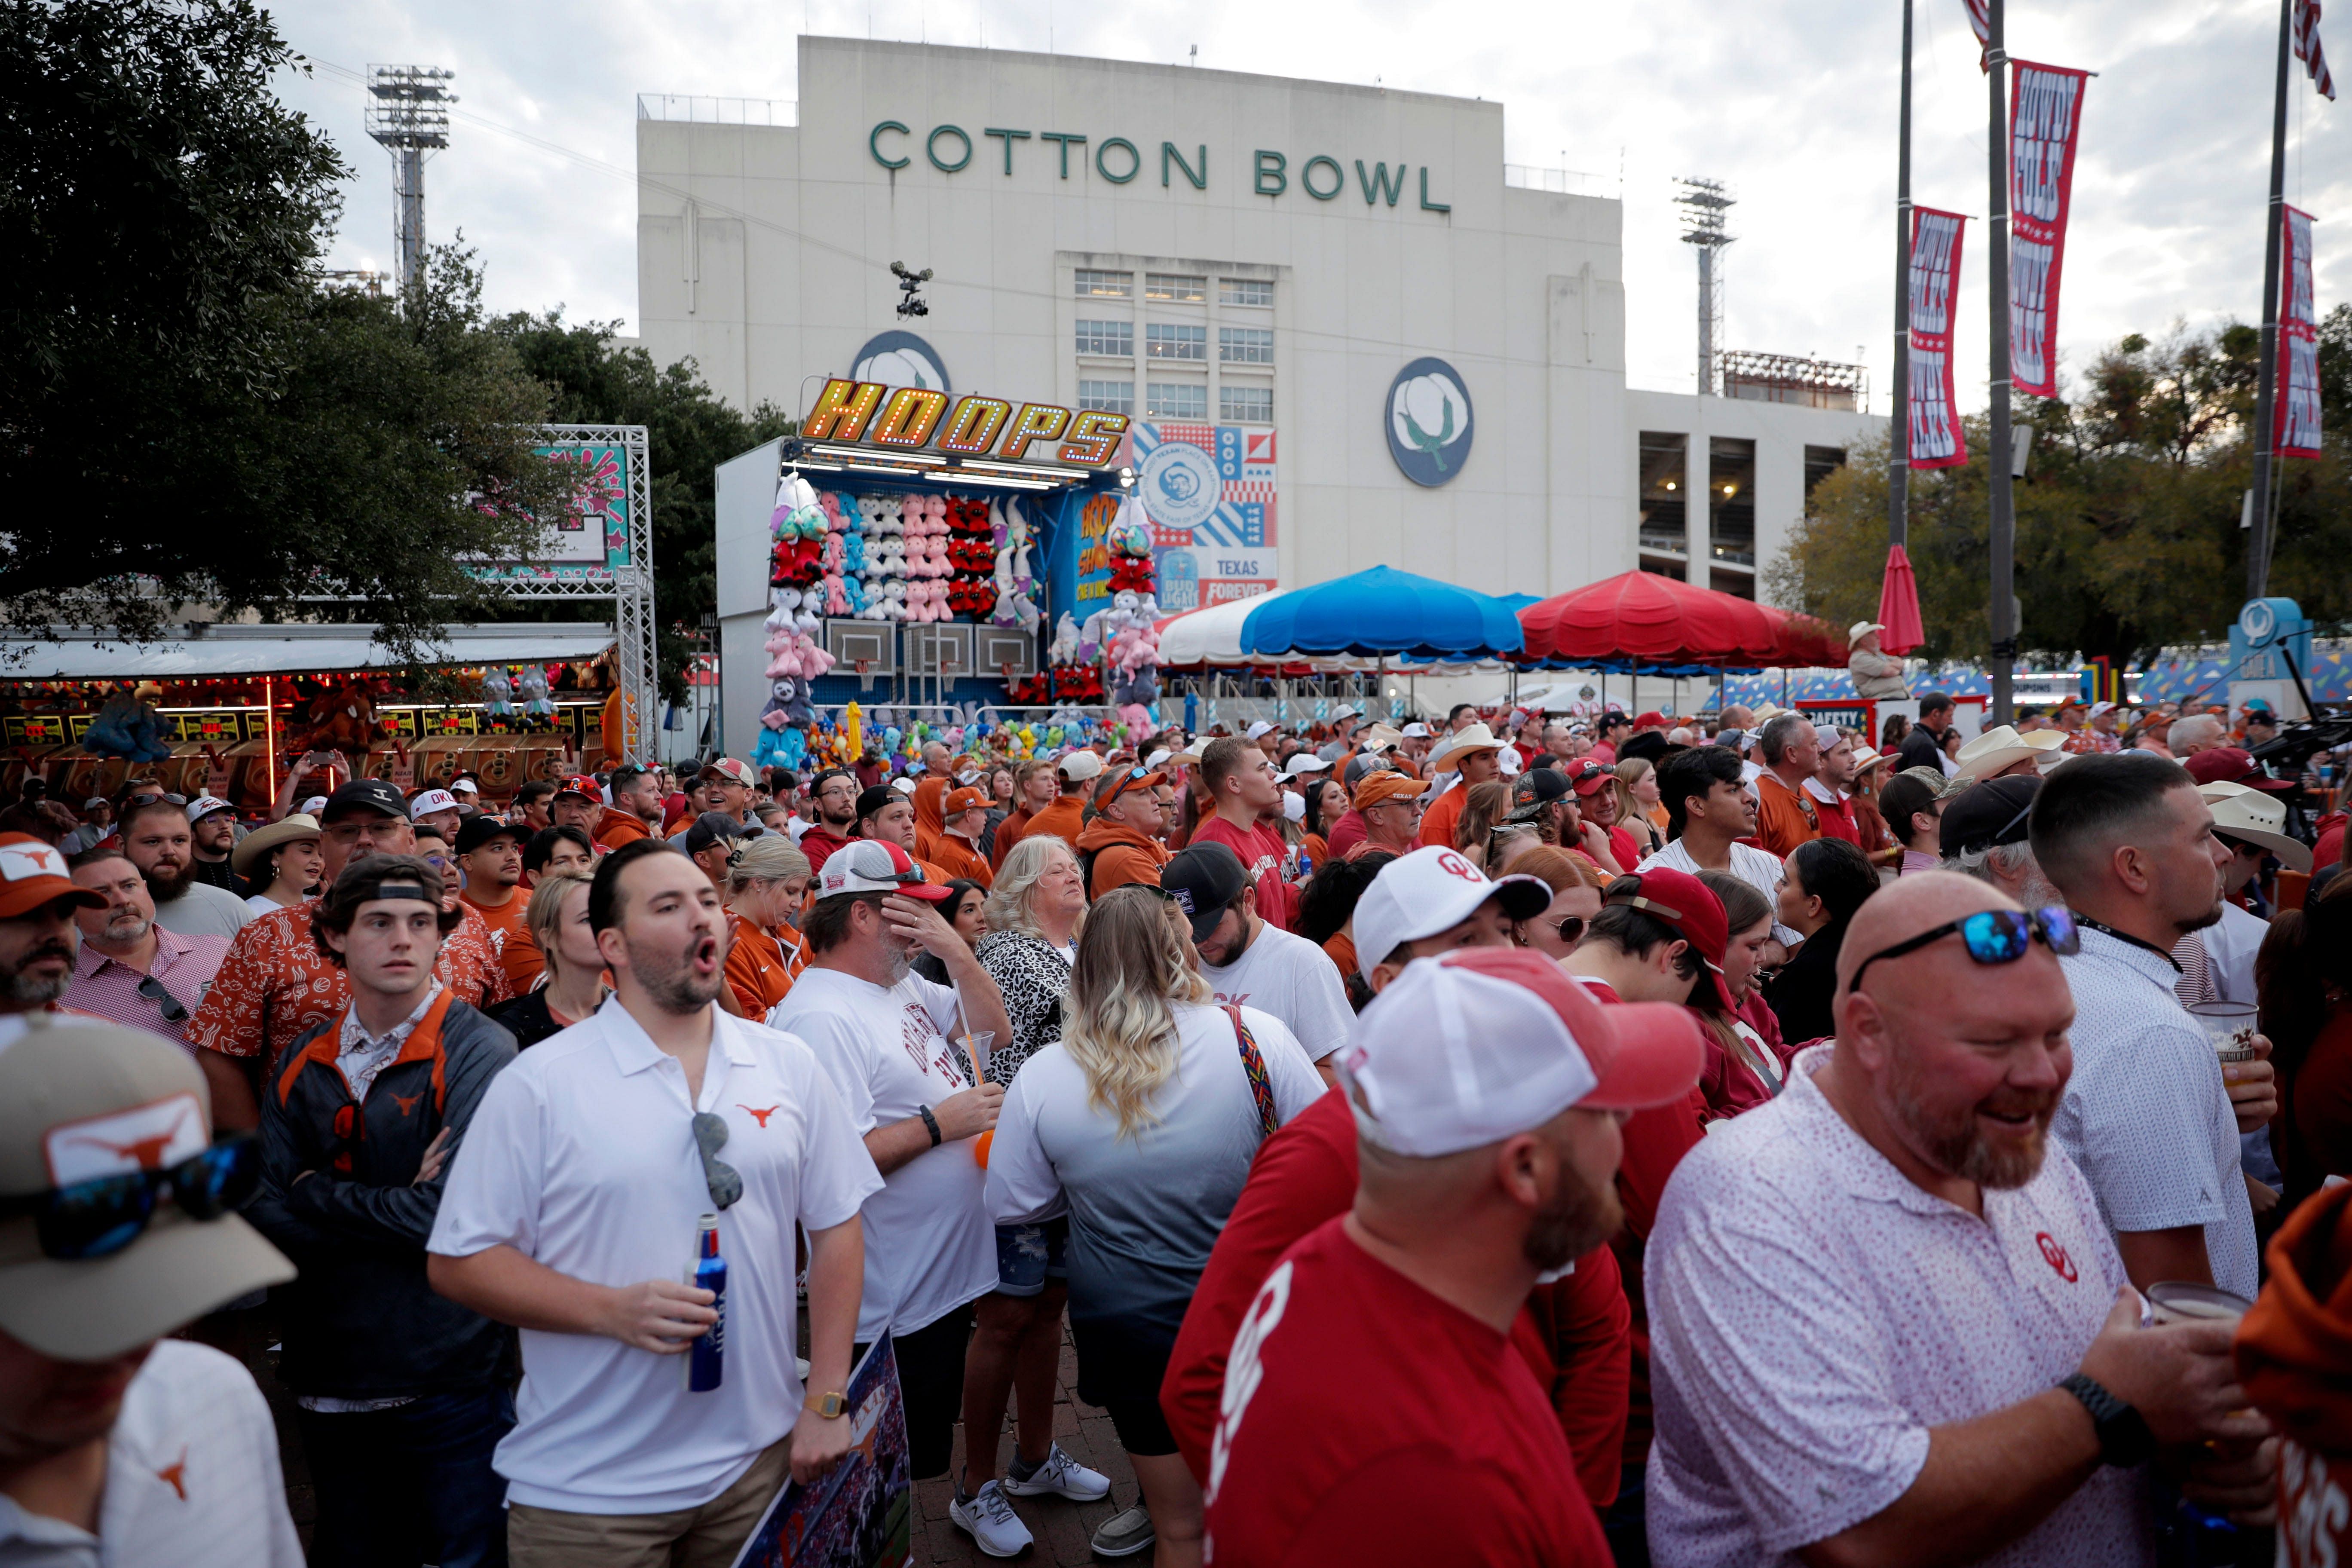 Fans outside the Cotton Bowl Stadium in Dallas, TX